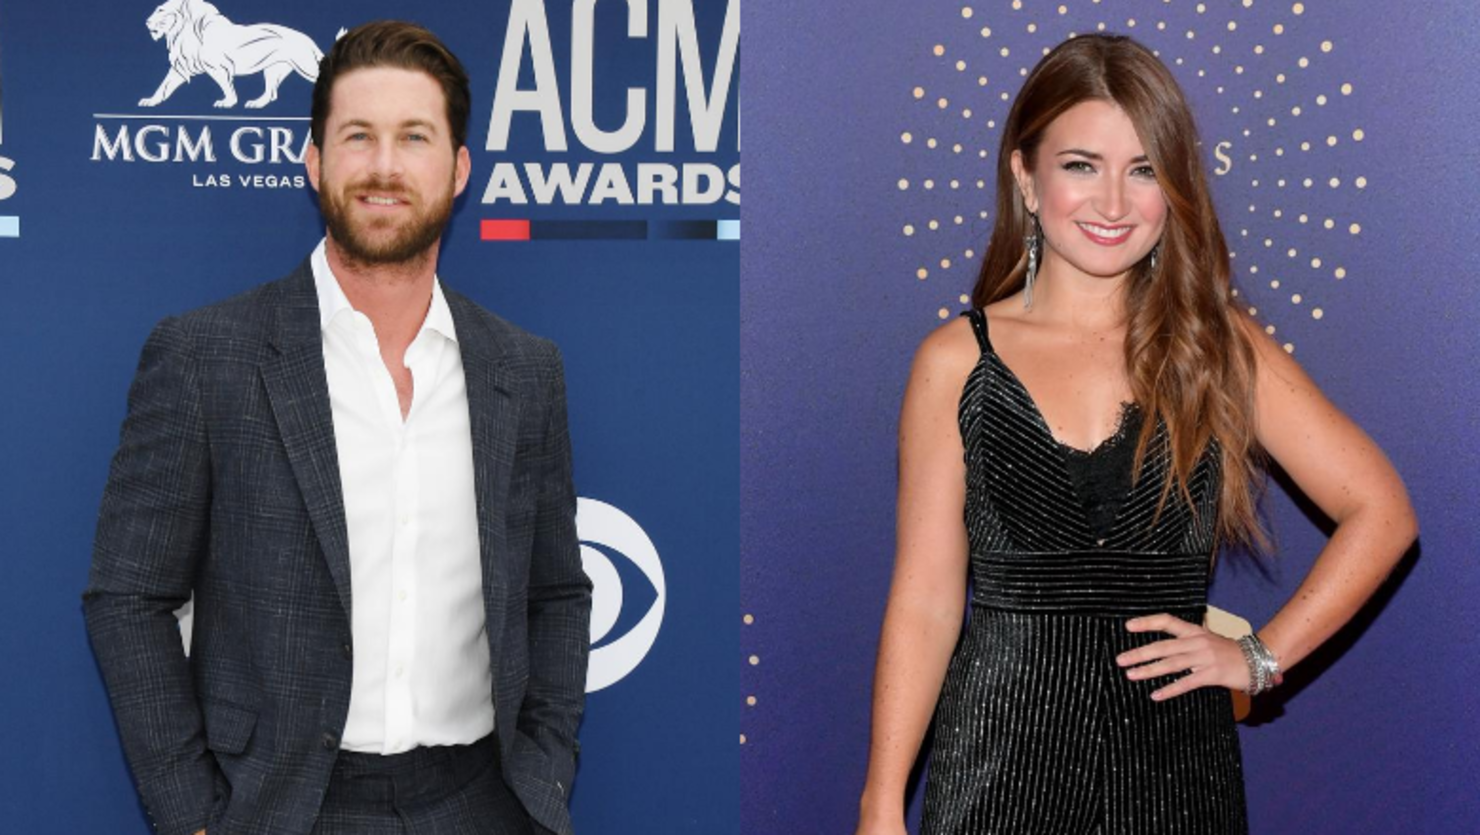 Riley Green And Tenille Townes Named ACM New Artists Of The Year iHeart